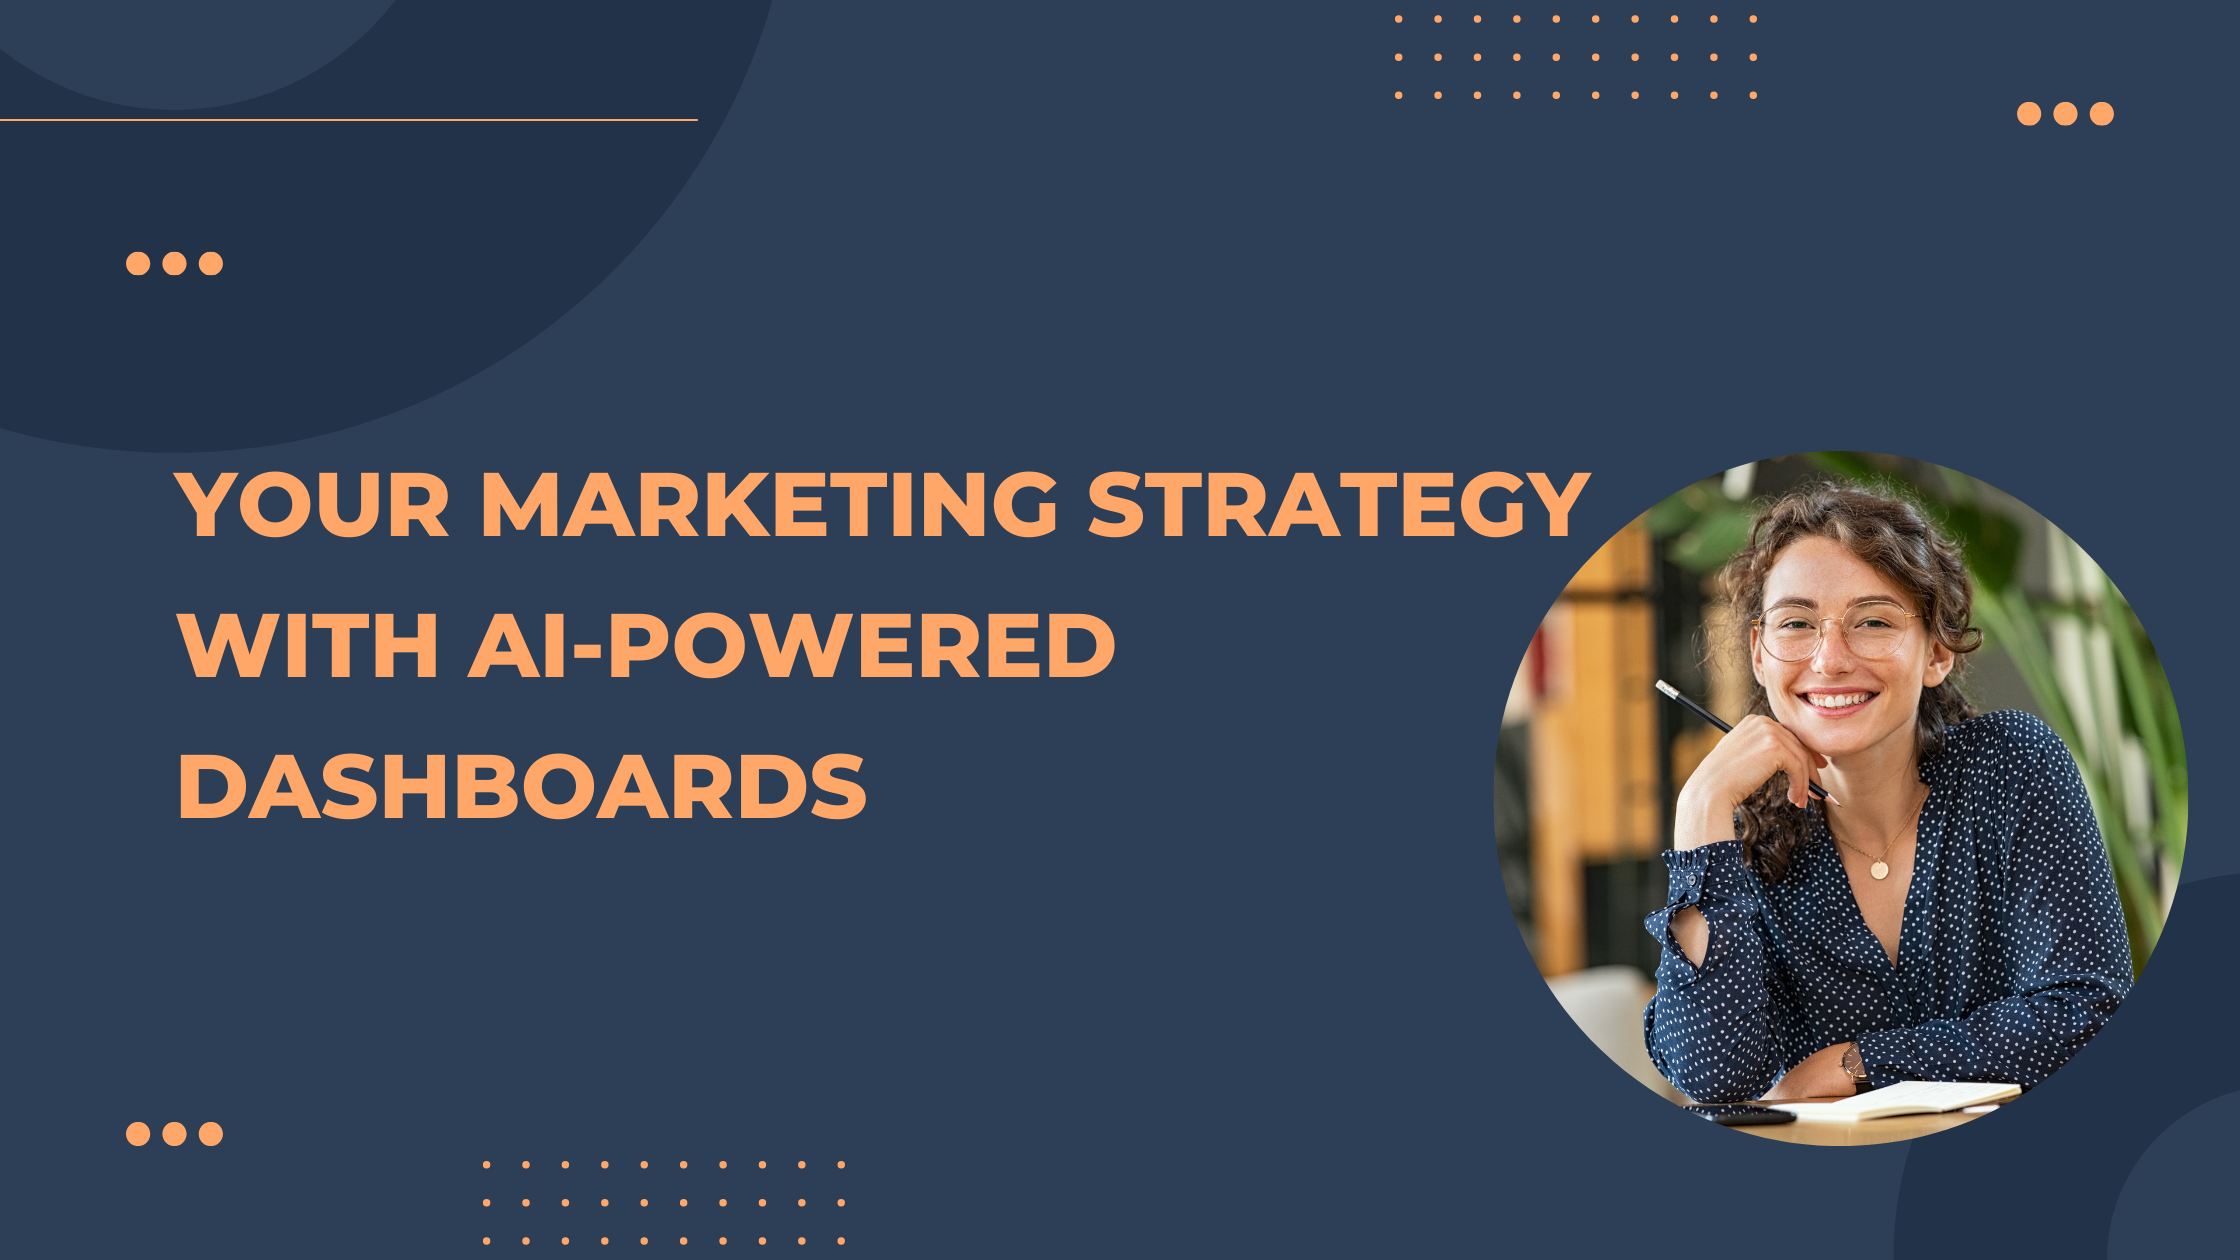 Your Marketing Strategy with AI-Powered Dashboards